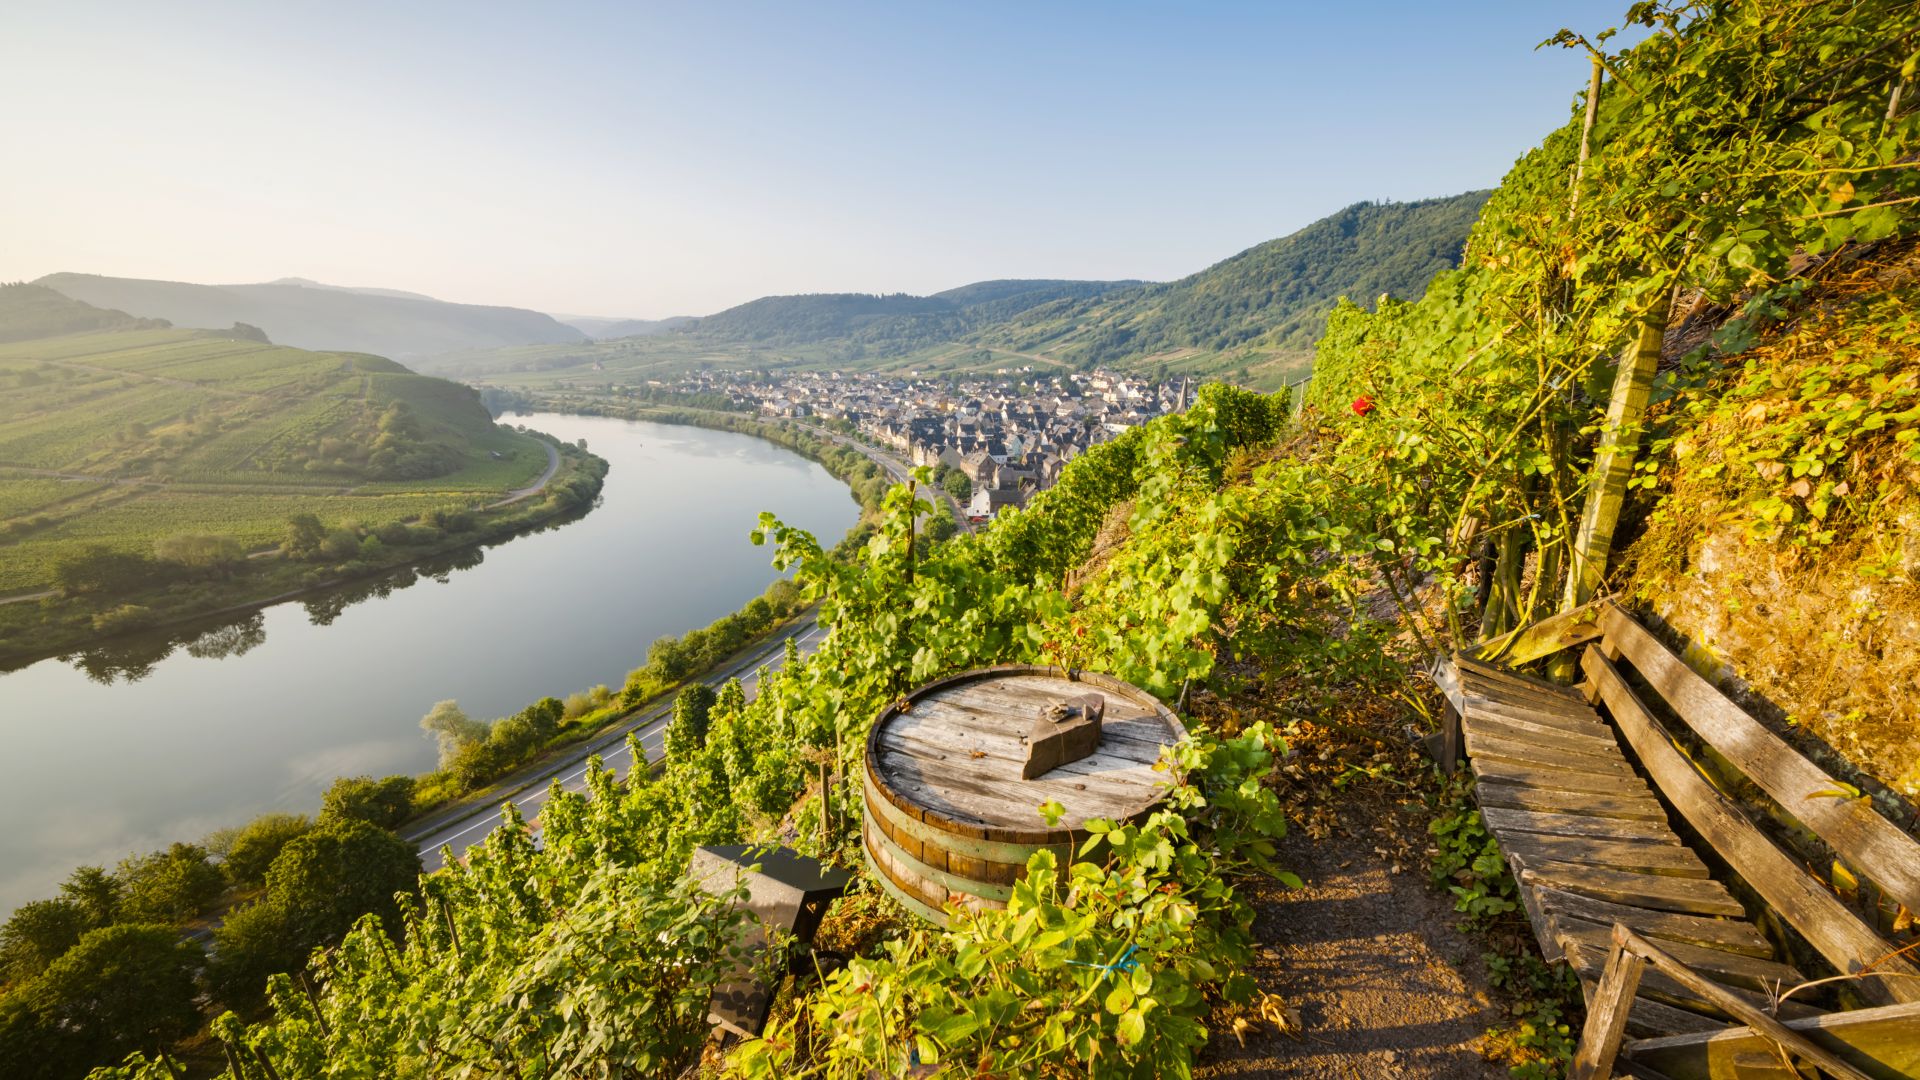 Bremm:The Calmont, Europe's steepest vineyard, view over the Moselle at dusk